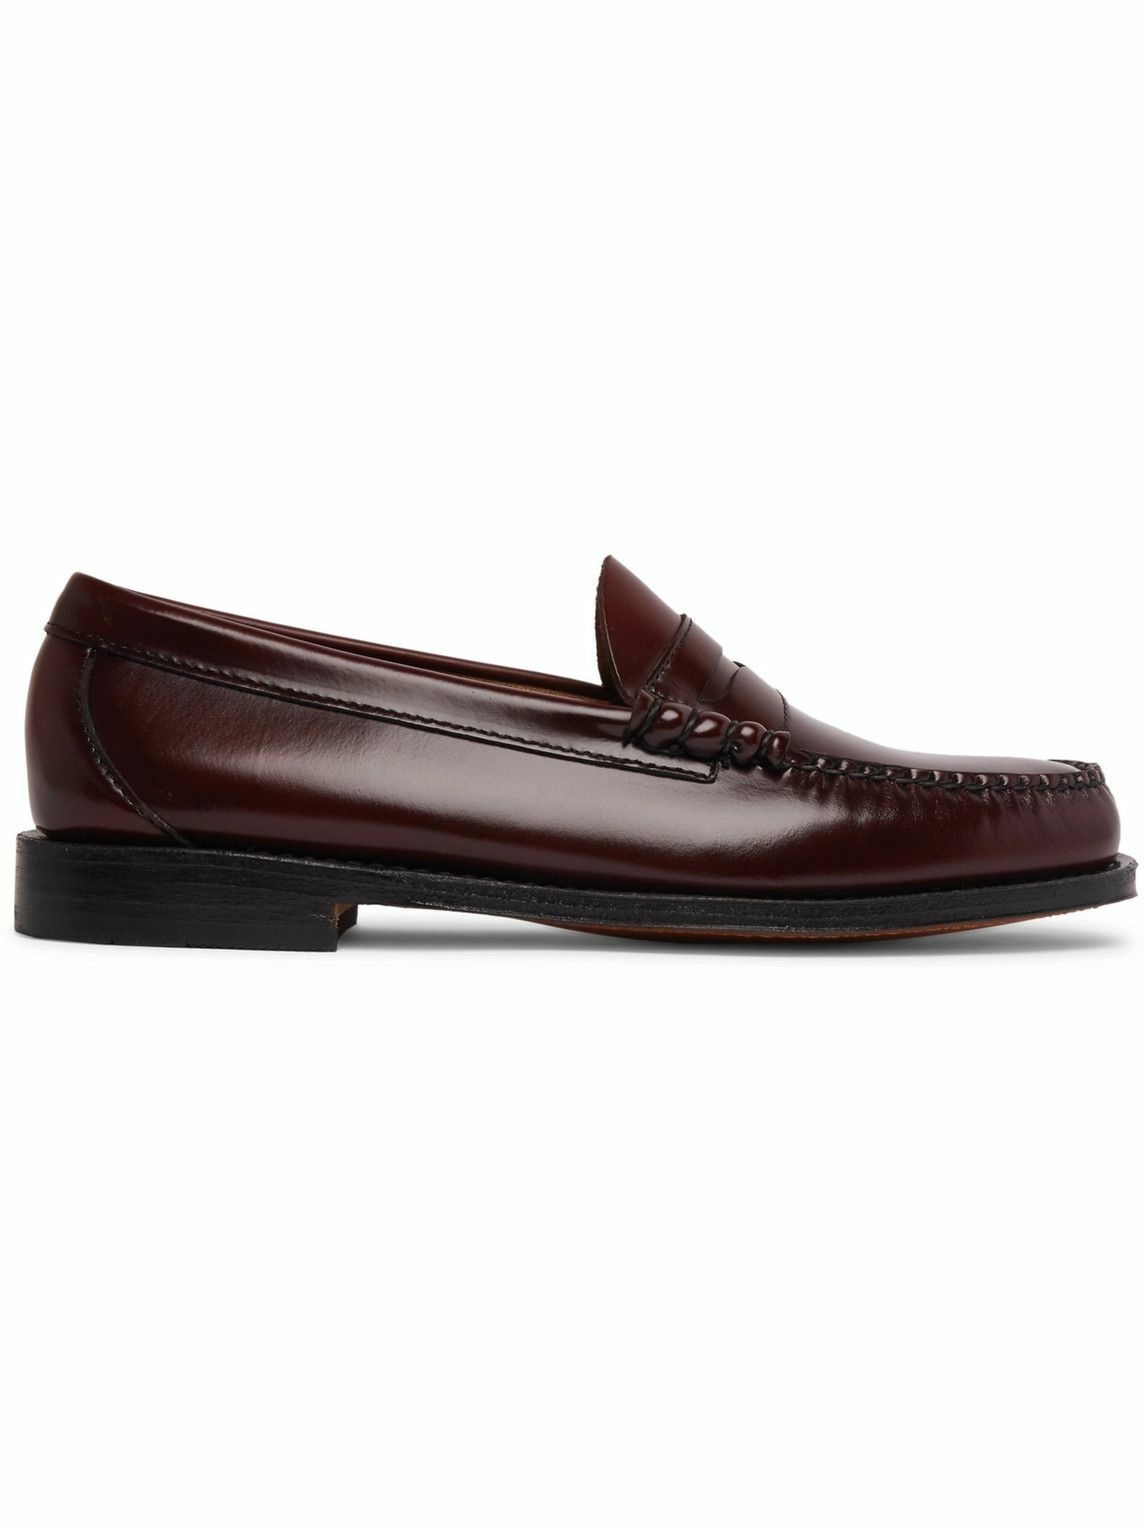 G.H. Bass & Co. - Weejuns Heritage Larson Leather Penny Loafers ...